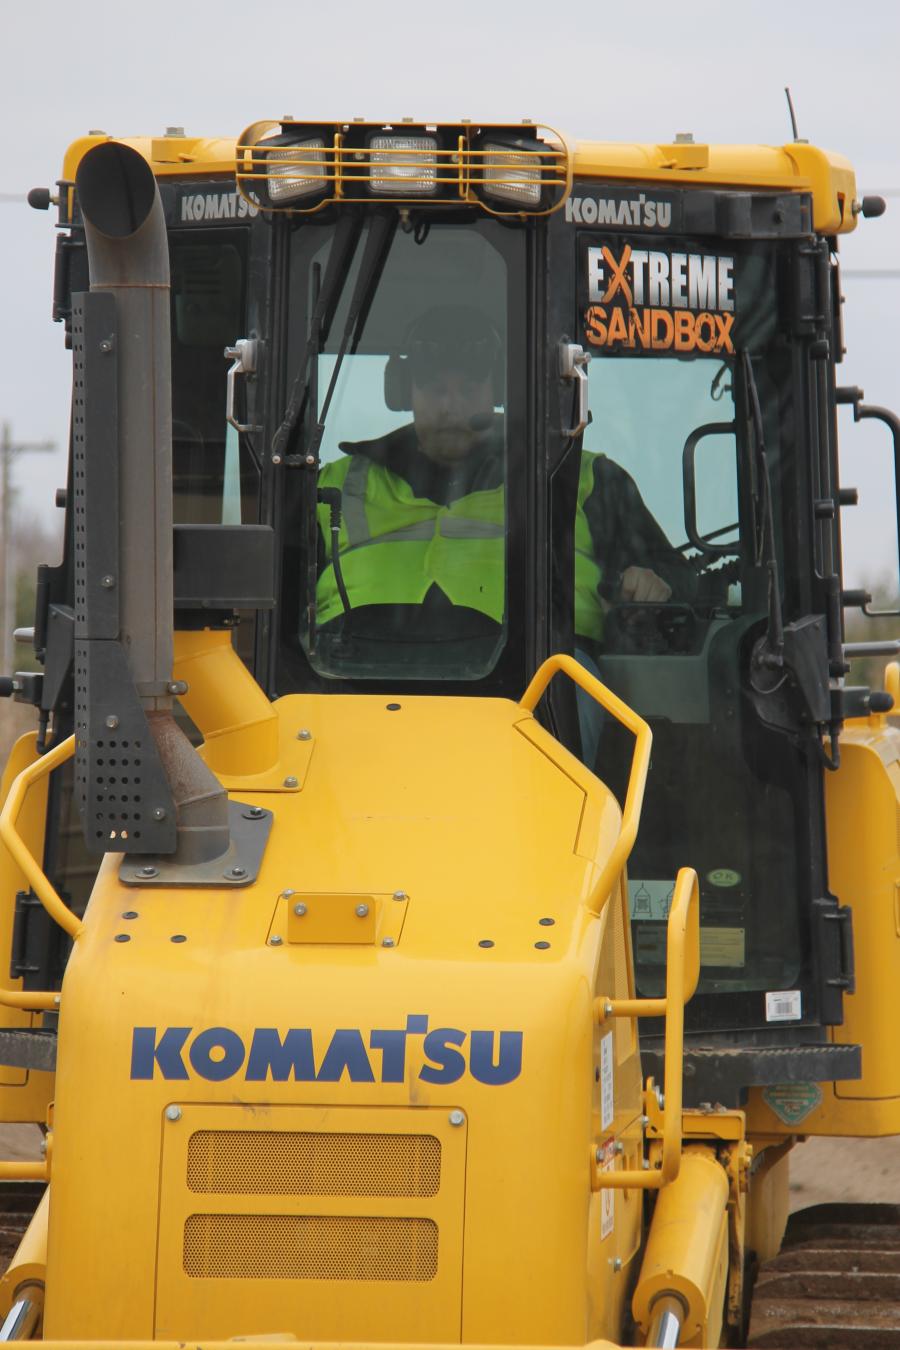 Komatsu America Corp. and Extreme Sandbox, a heavy-equipment-adventure company, have announced an exclusive equipment sponsorship agreement that enables both companies to expose more Americans to the exhilarating experience of operating heavy machinery.